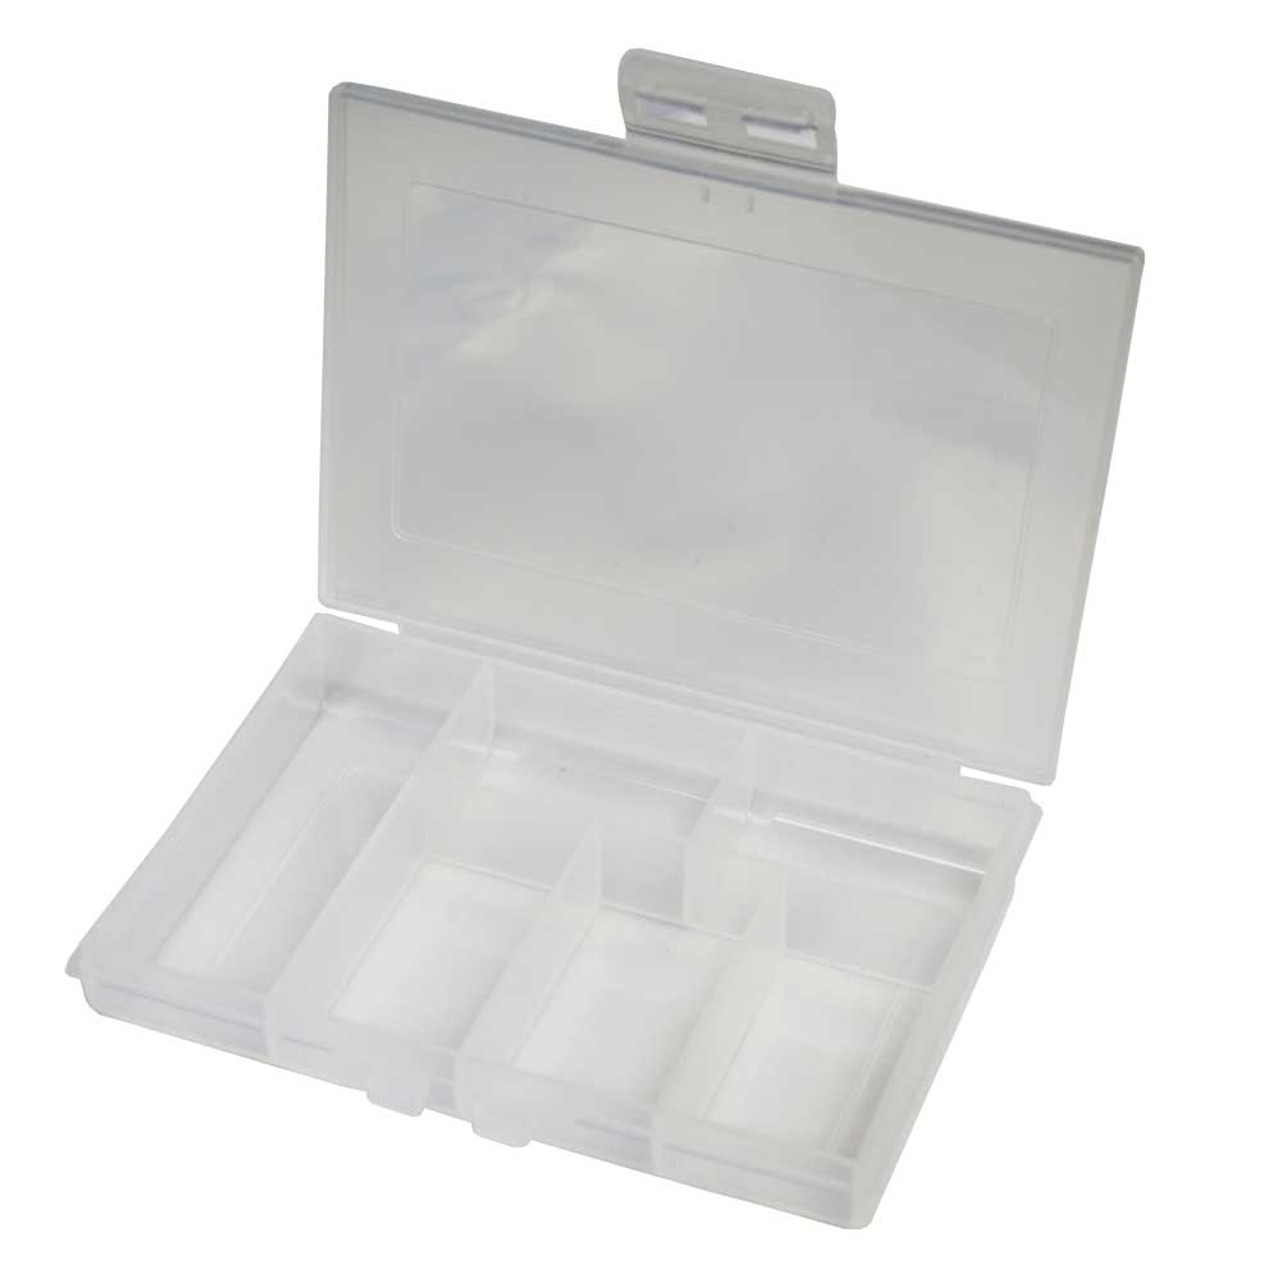 Frosted Plastic Organizer Box with 6 Compartments